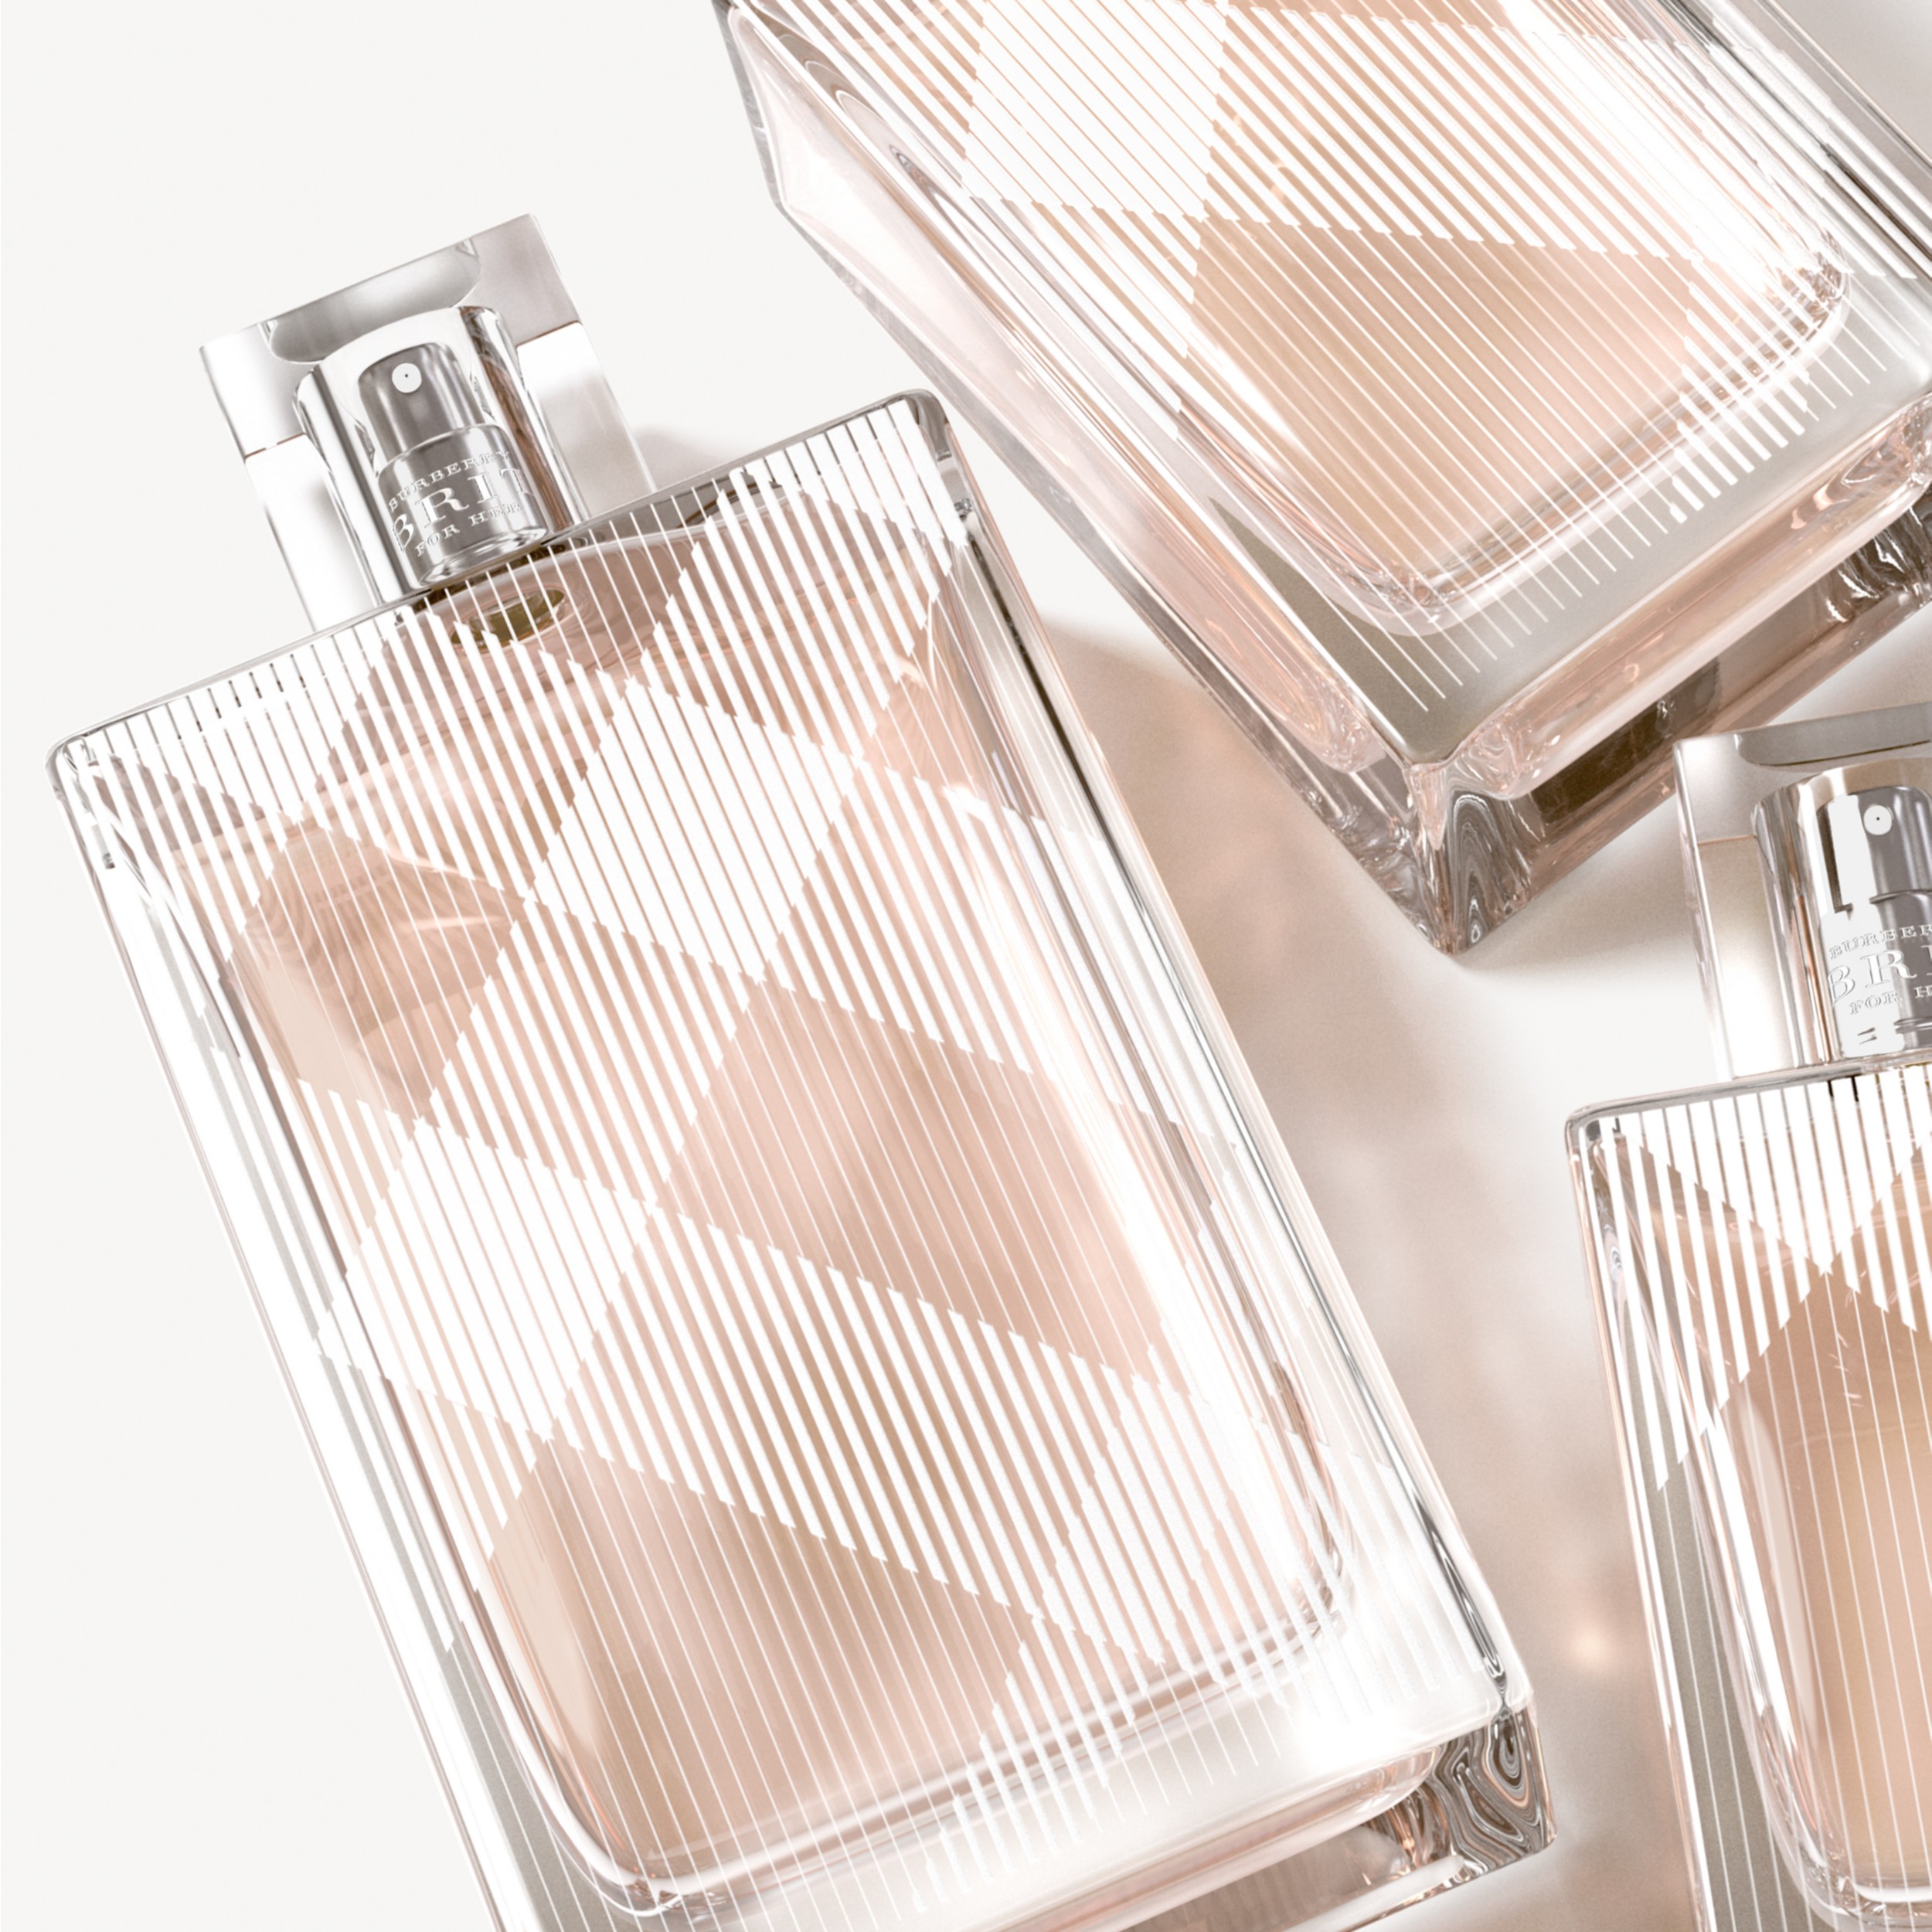 3.3-Ounce Bottle of Burberry Brit Perfume is on sale for $34.98